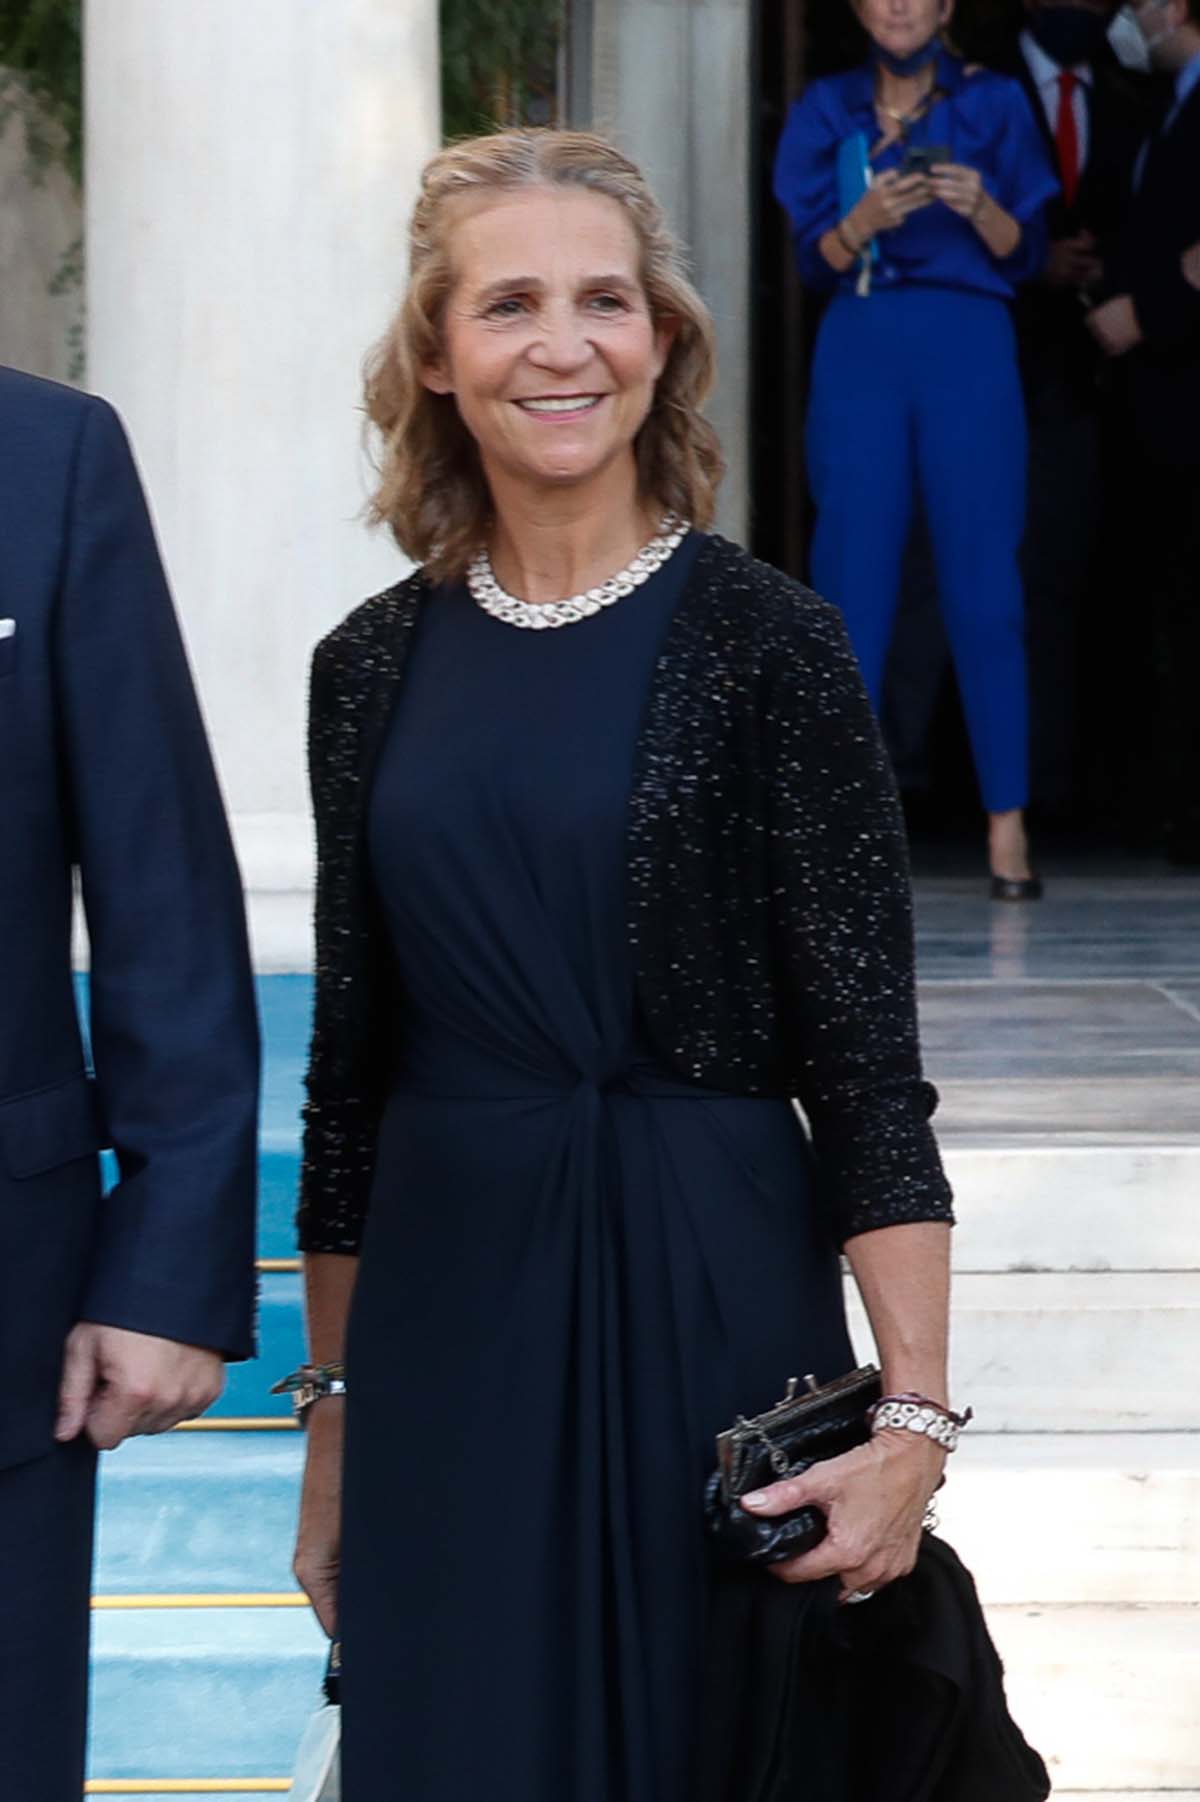 Elena de Borbon during wedding of Philippos of Greece and Denmark and Nina Flohr in Athenas on Saturday, 23 October 2022.